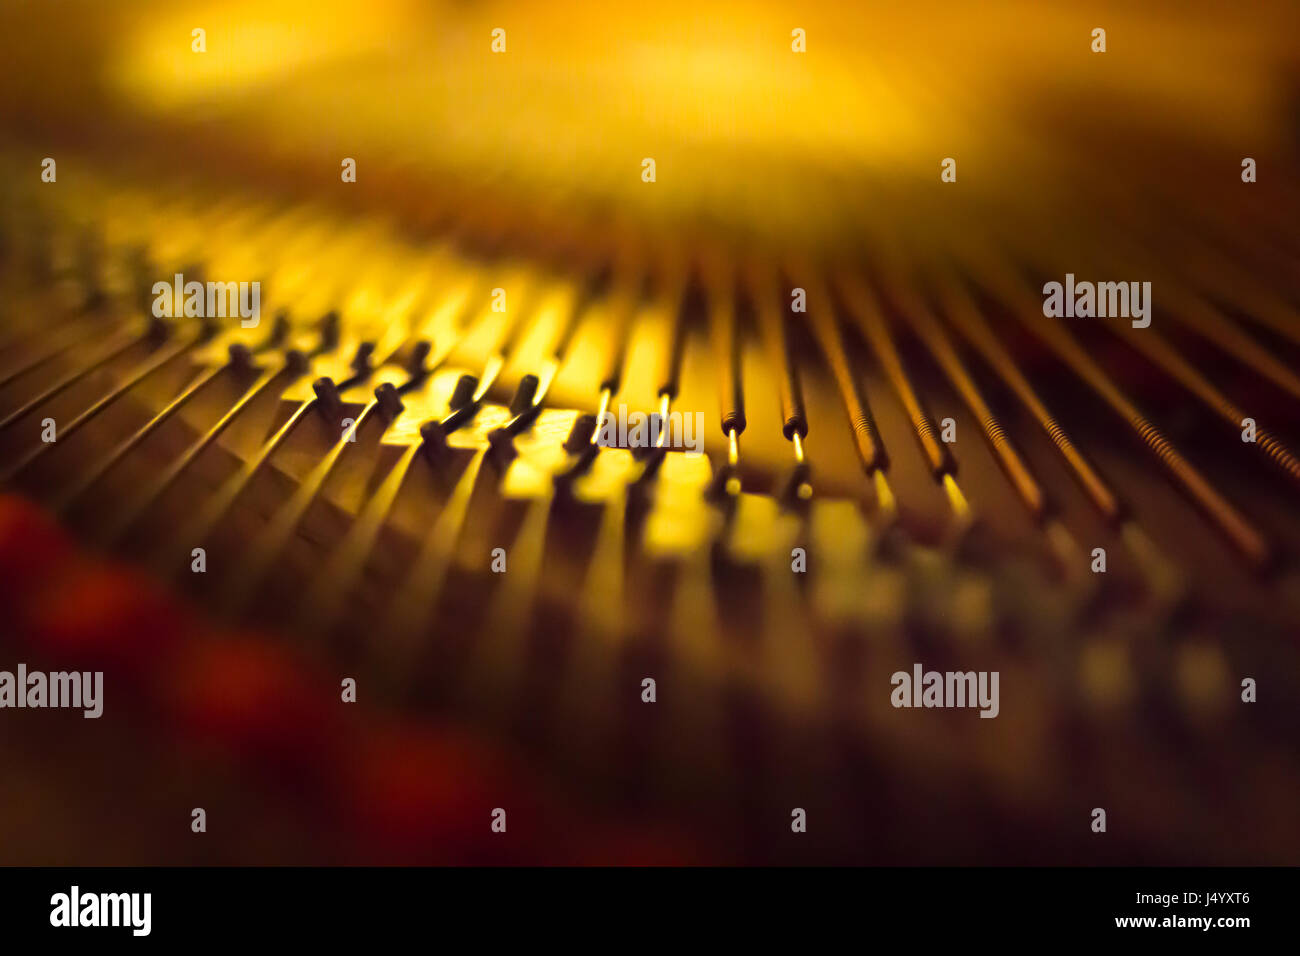 Grand piano bridge pins and strings blurred background. Stock Photo